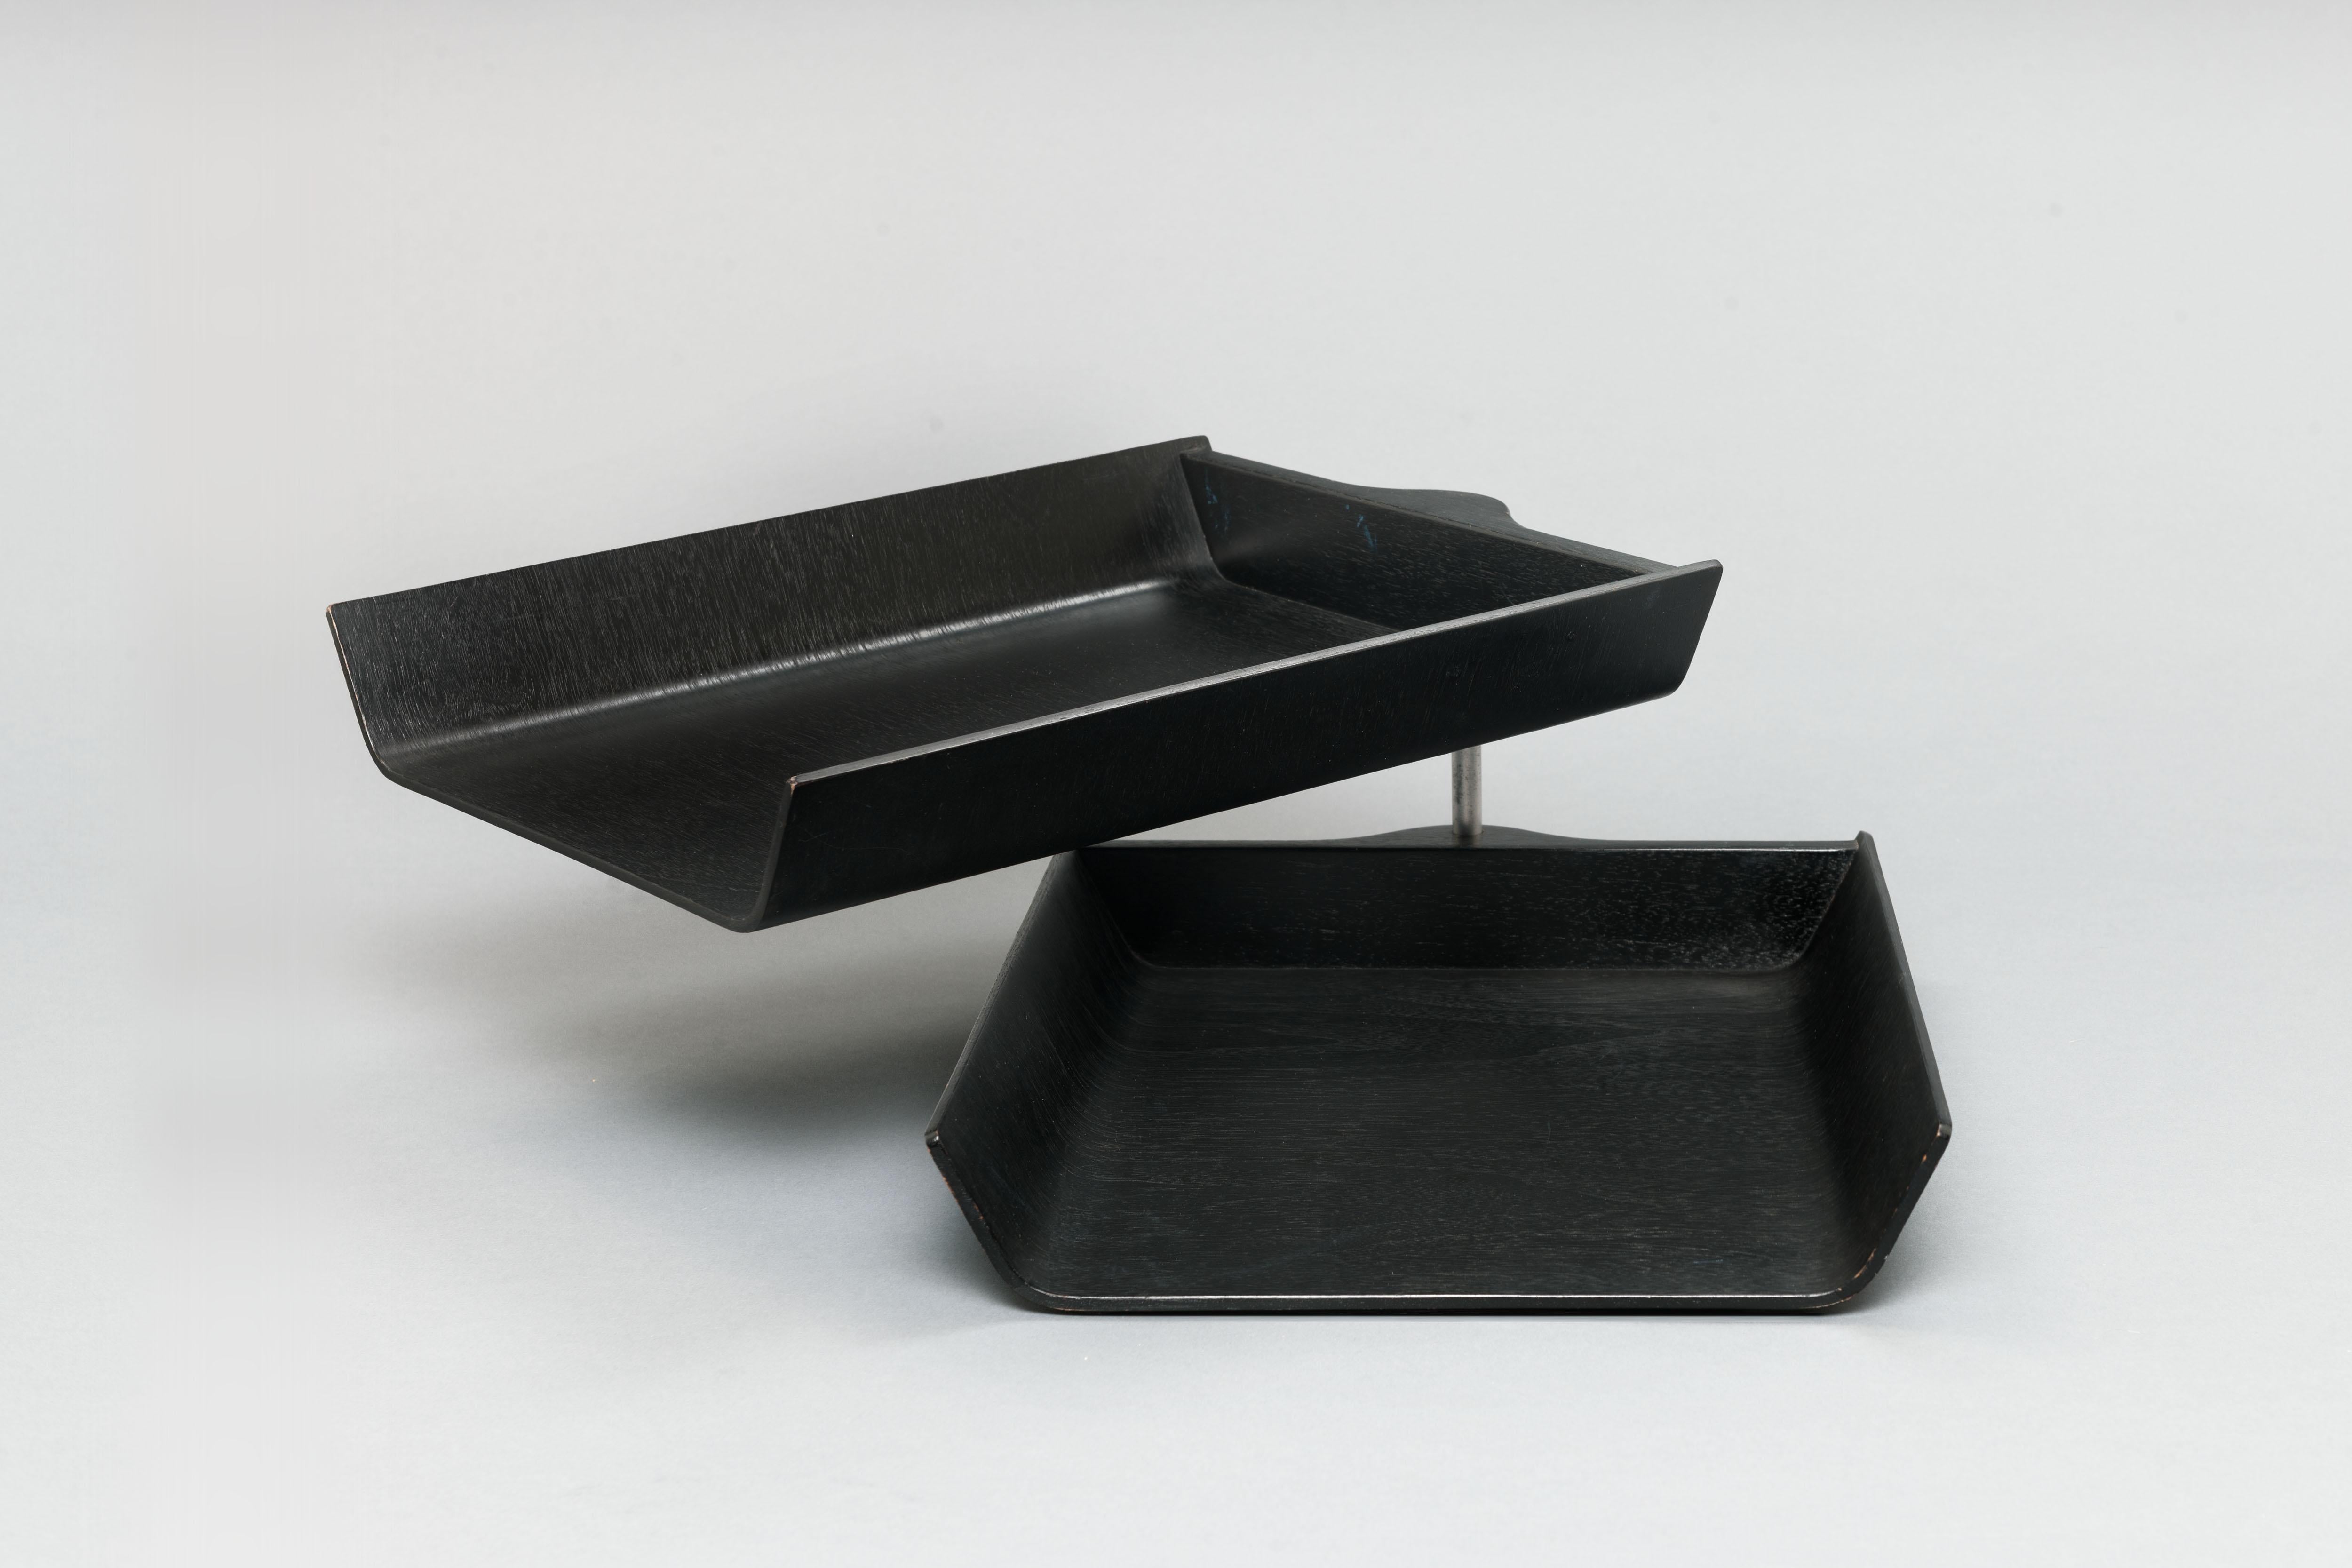 This double pivoting desk tray was designed by American designer Florence Knoll in 1948 and is a collectable midcentury accessory. The trays are made of plywood with a solid wooden back pivoting on a metal support.
A wonderful desk office accessory